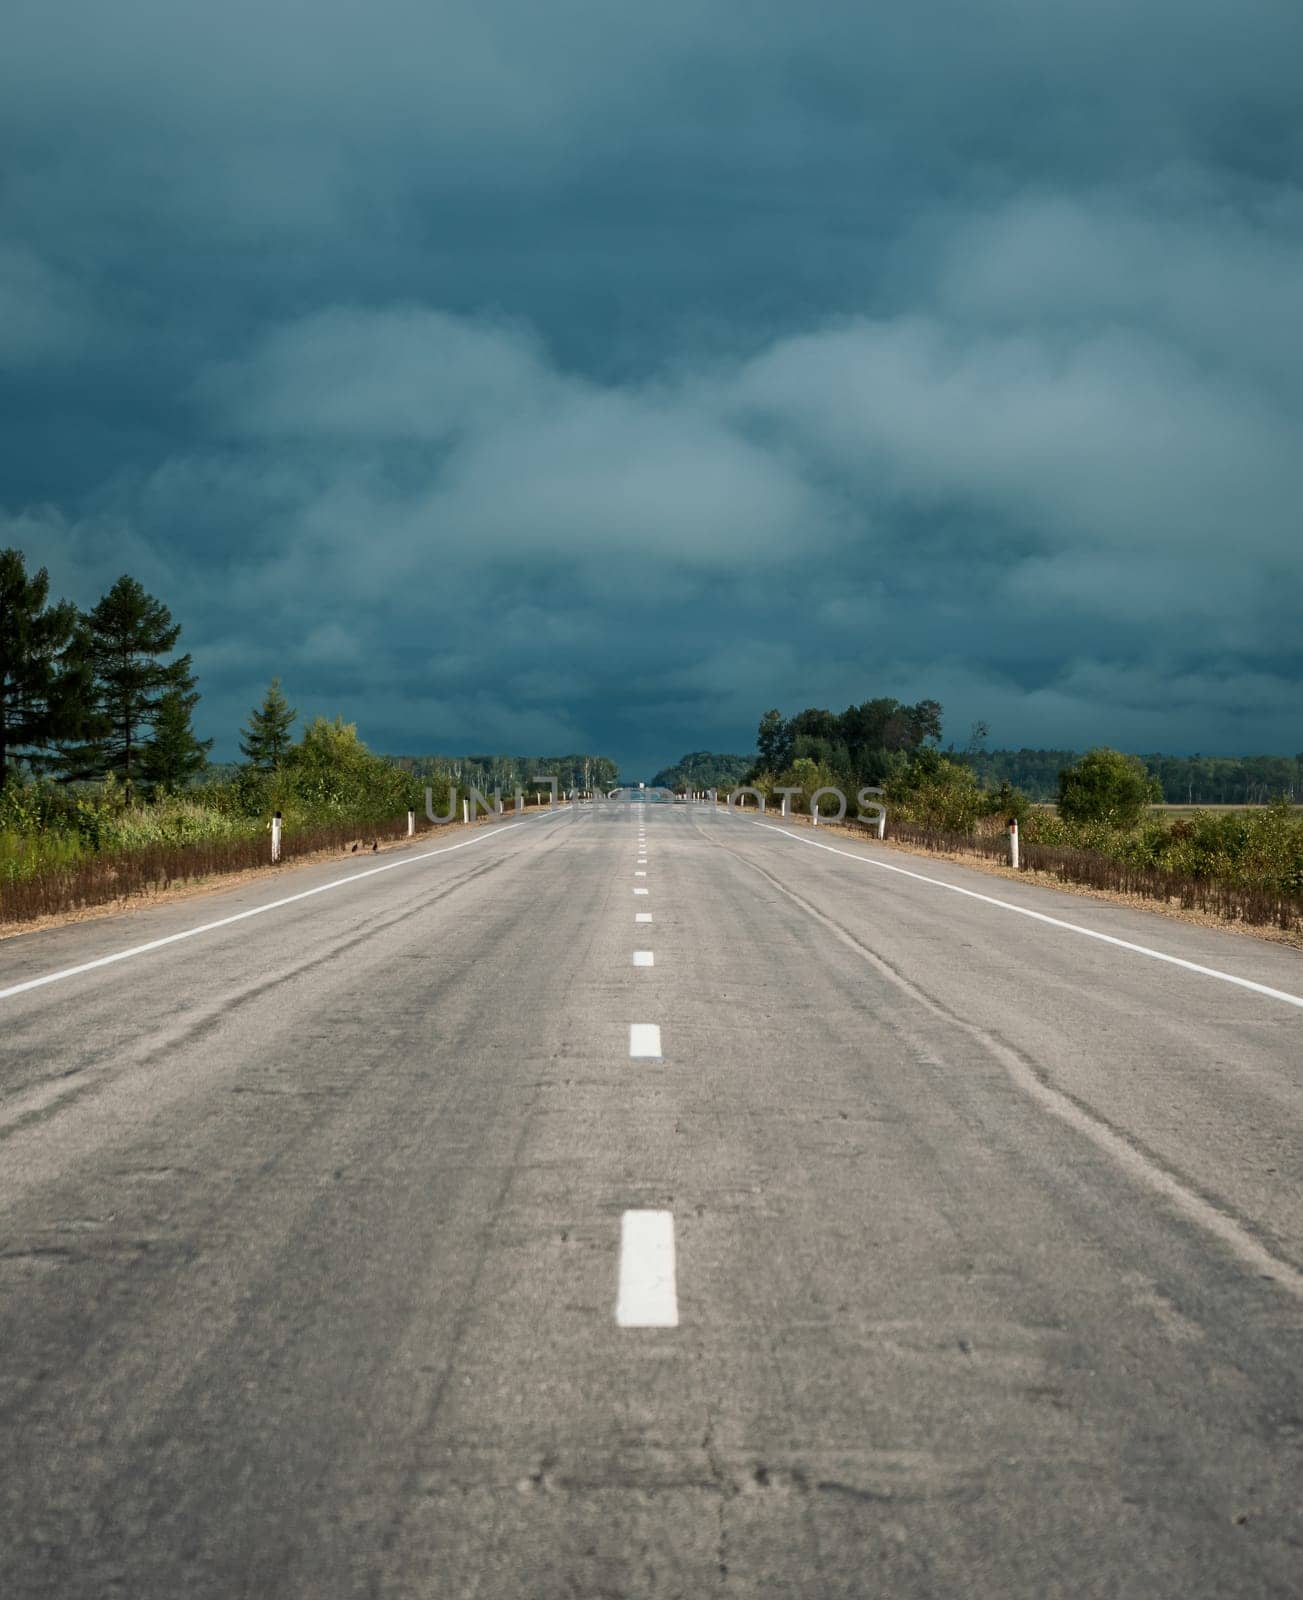 Straight empty highway stretching toward distant forest on a cloudy day by Busker